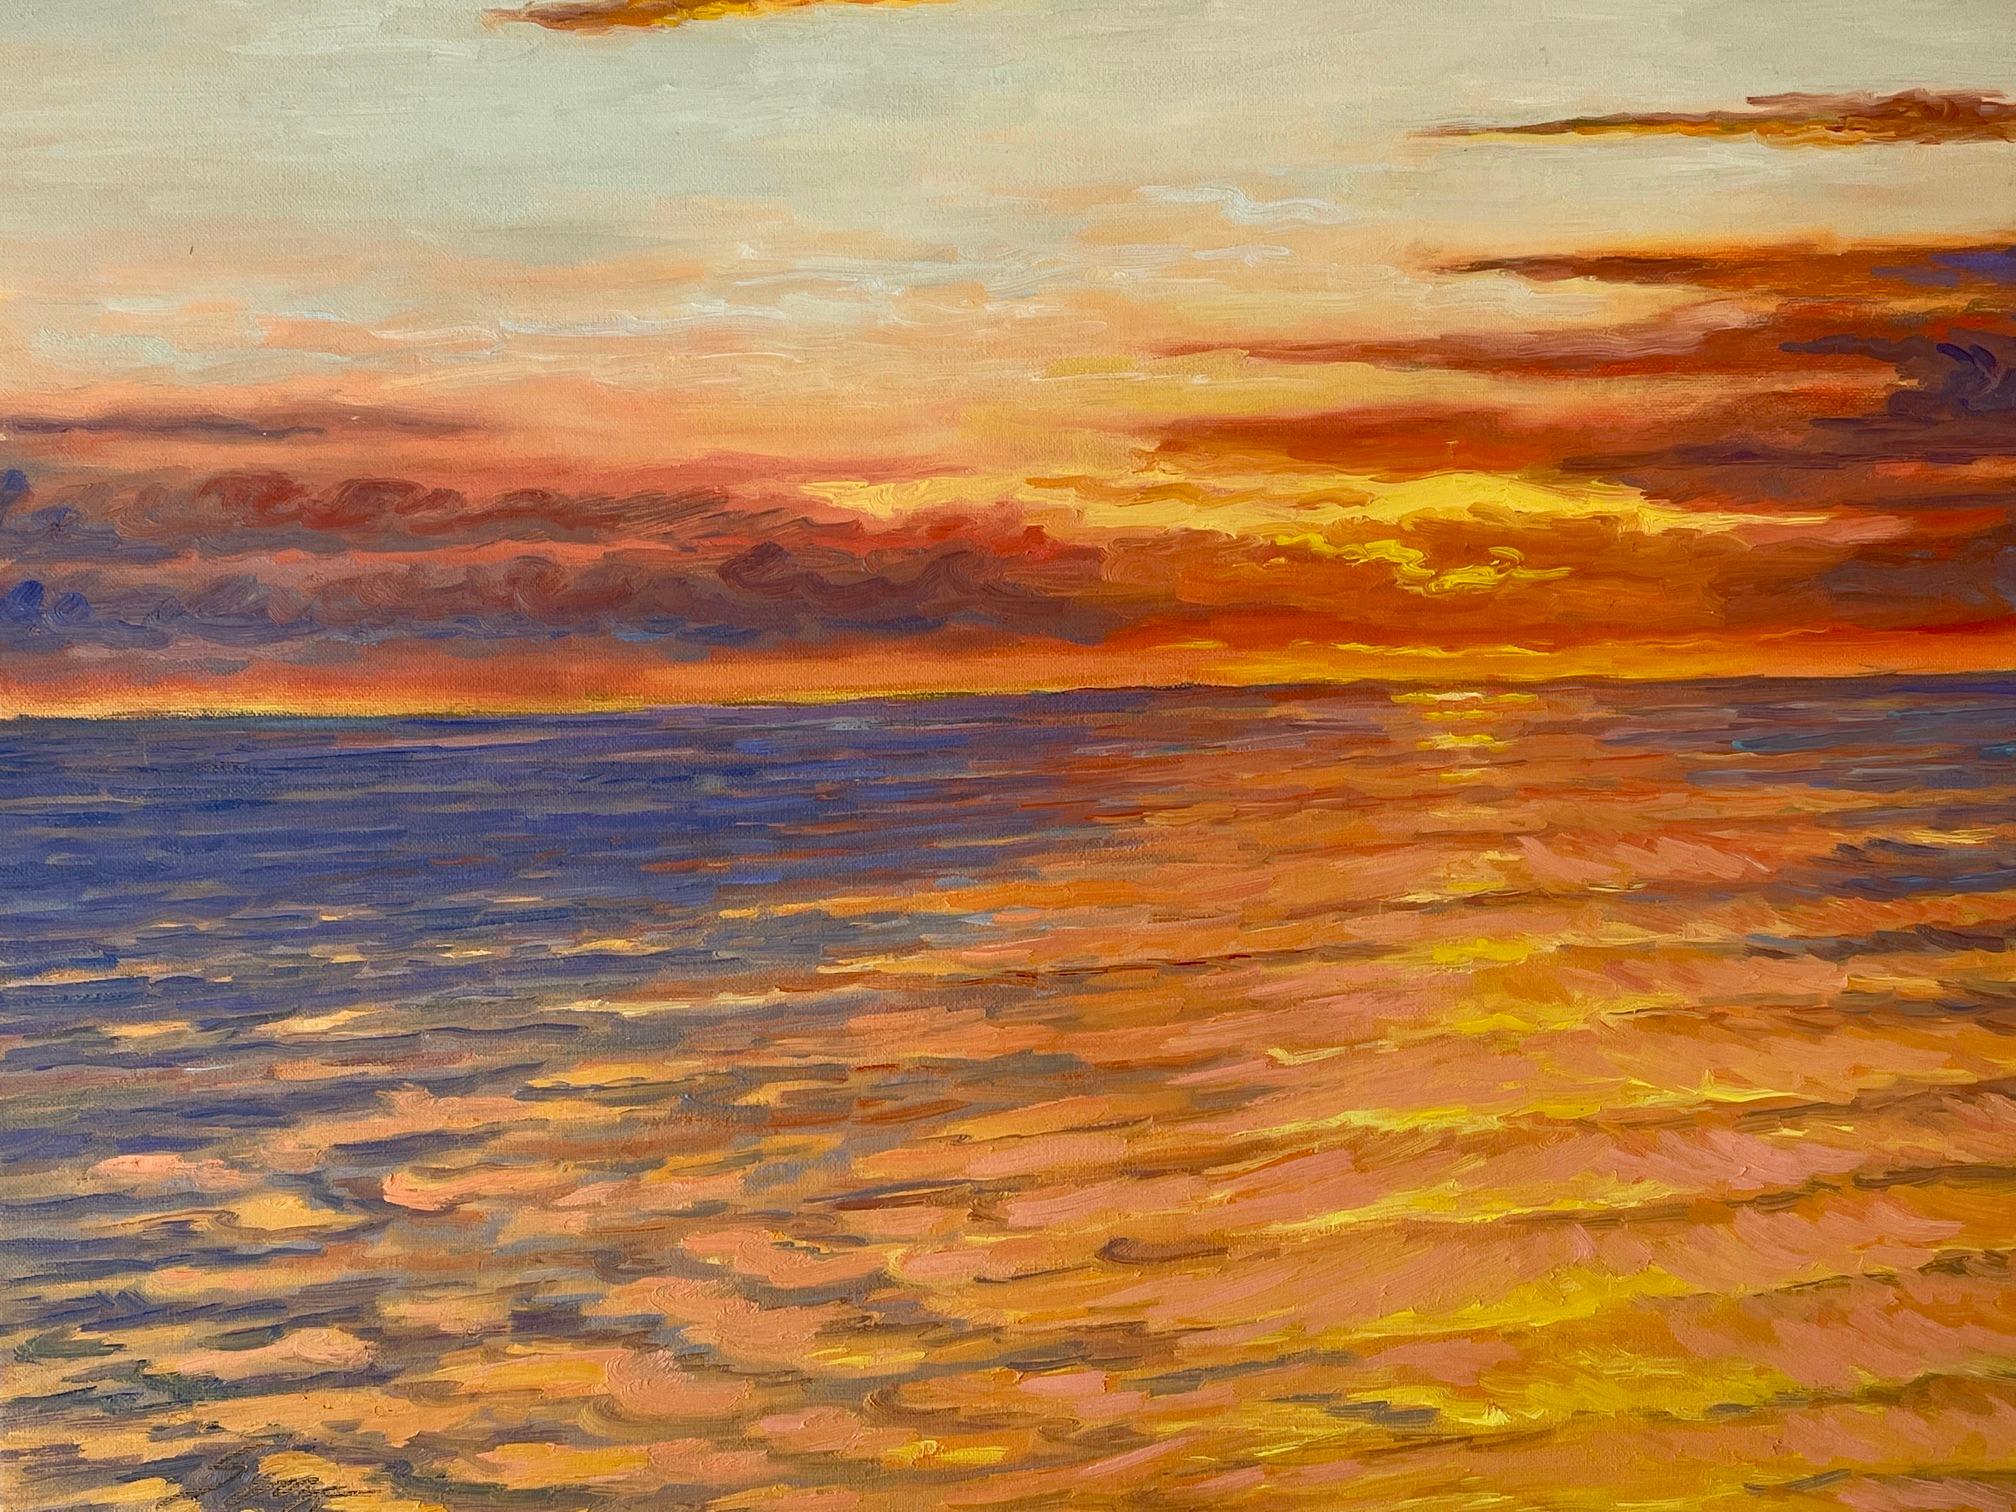 Impressionistic Sunset -- Sun setting off Long Island's East End, New York.  - Painting by Carl Scorza